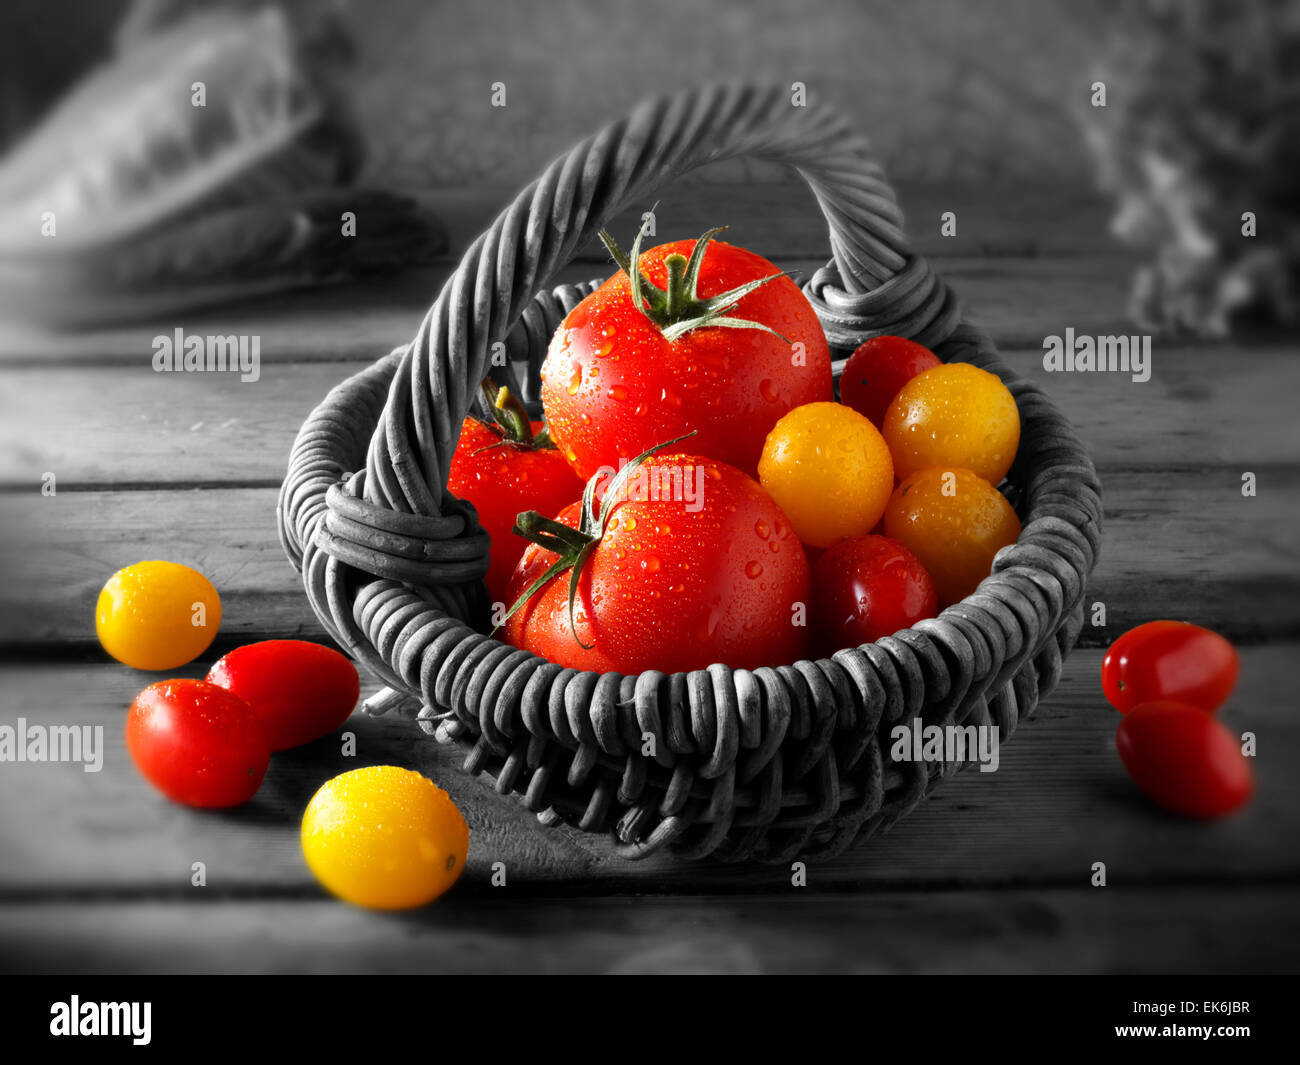 Mixed fresh picked yellow and red plum tomatoes in a basket Stock Photo